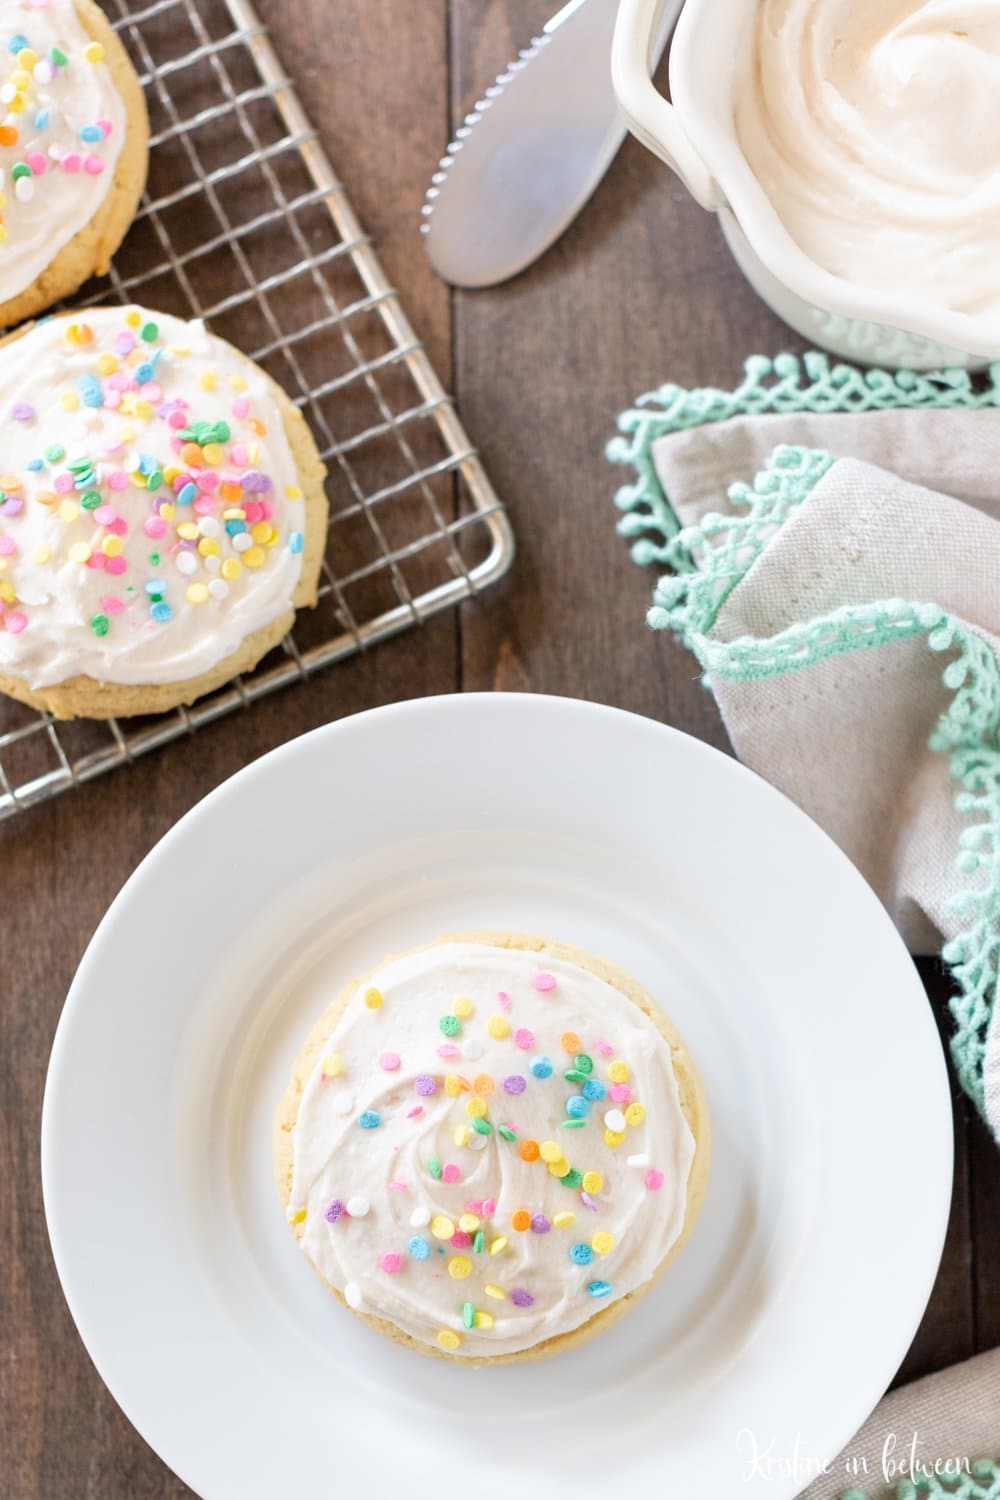 This soft sugar cookie recipe is a must-bake for the holidays! The cookies are light and fluffy, making them perfect for buttercream frosting and sprinkles!